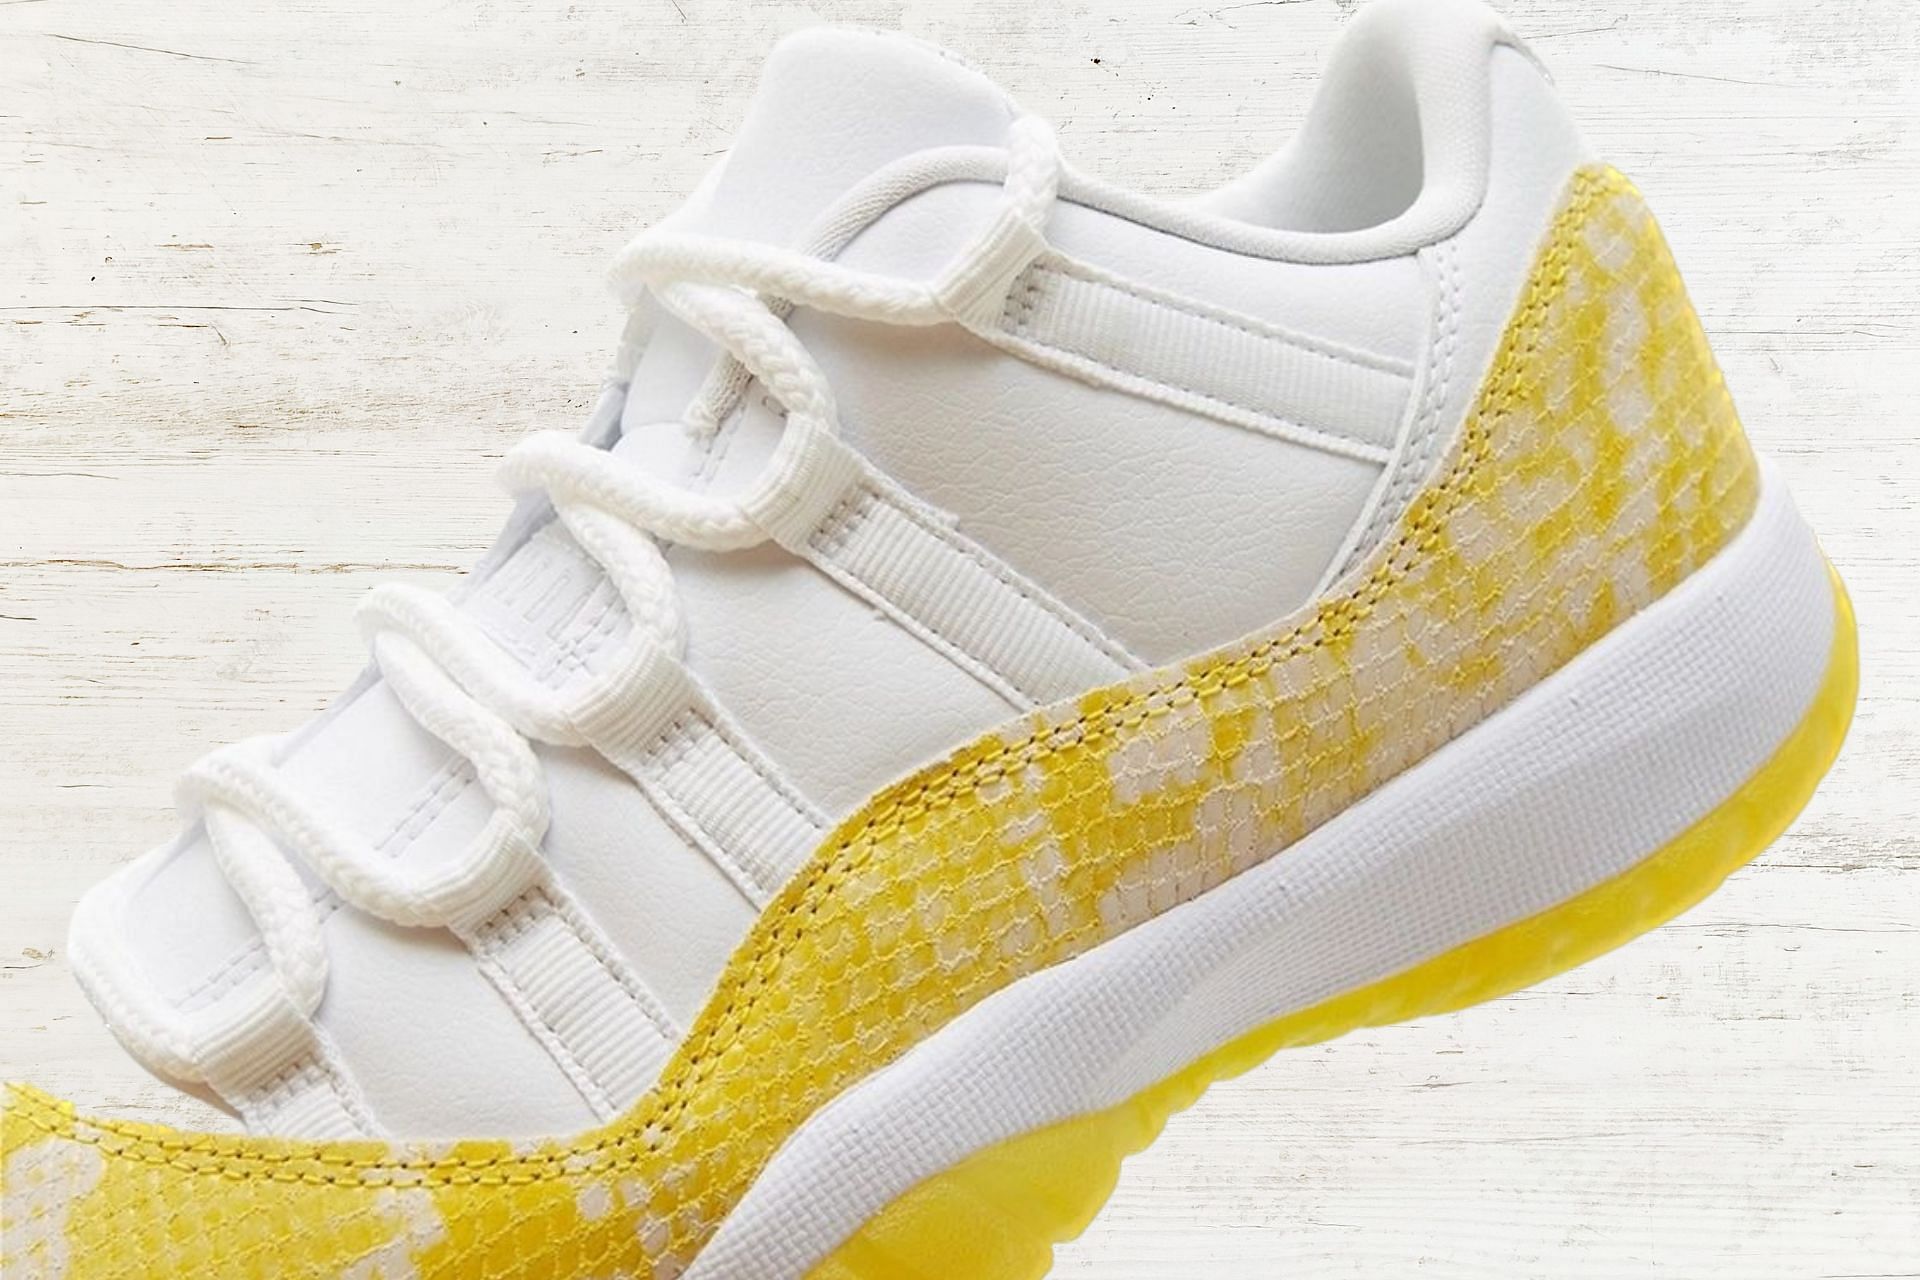 Intervene Fumble Lunar surface Nike: Air Jordan 11 Retro Low “Yellow Snakeskin” shoes: Where to buy,  price, and more details explored